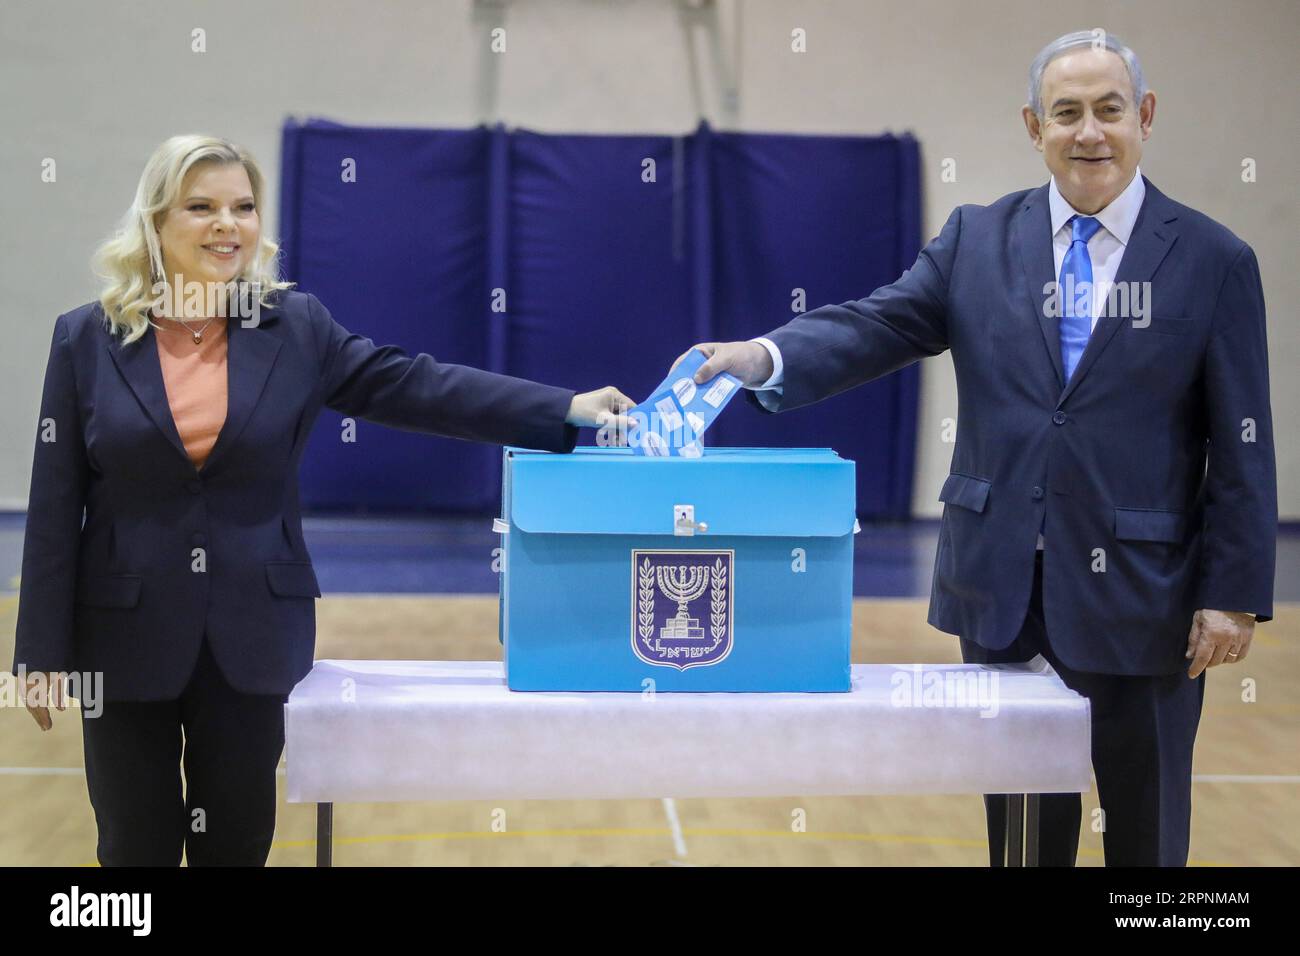 News Bilder des Tages 200302 -- JERUSALEM, March 2, 2020 -- Israeli Prime Minister Benjamin Netanyahu and his wife Sara vote at a polling station in Jerusalem, on March 2, 2020. Israelis on Monday began casting ballots in parliamentary elections for the third time in less than a year. Marc Israel Sellem/JINI via Xinhua MIDEAST-JERUSALEM-NETANYAHU-PARLIAMENTARY ELECTIONS ShangxHao PUBLICATIONxNOTxINxCHN Stock Photo